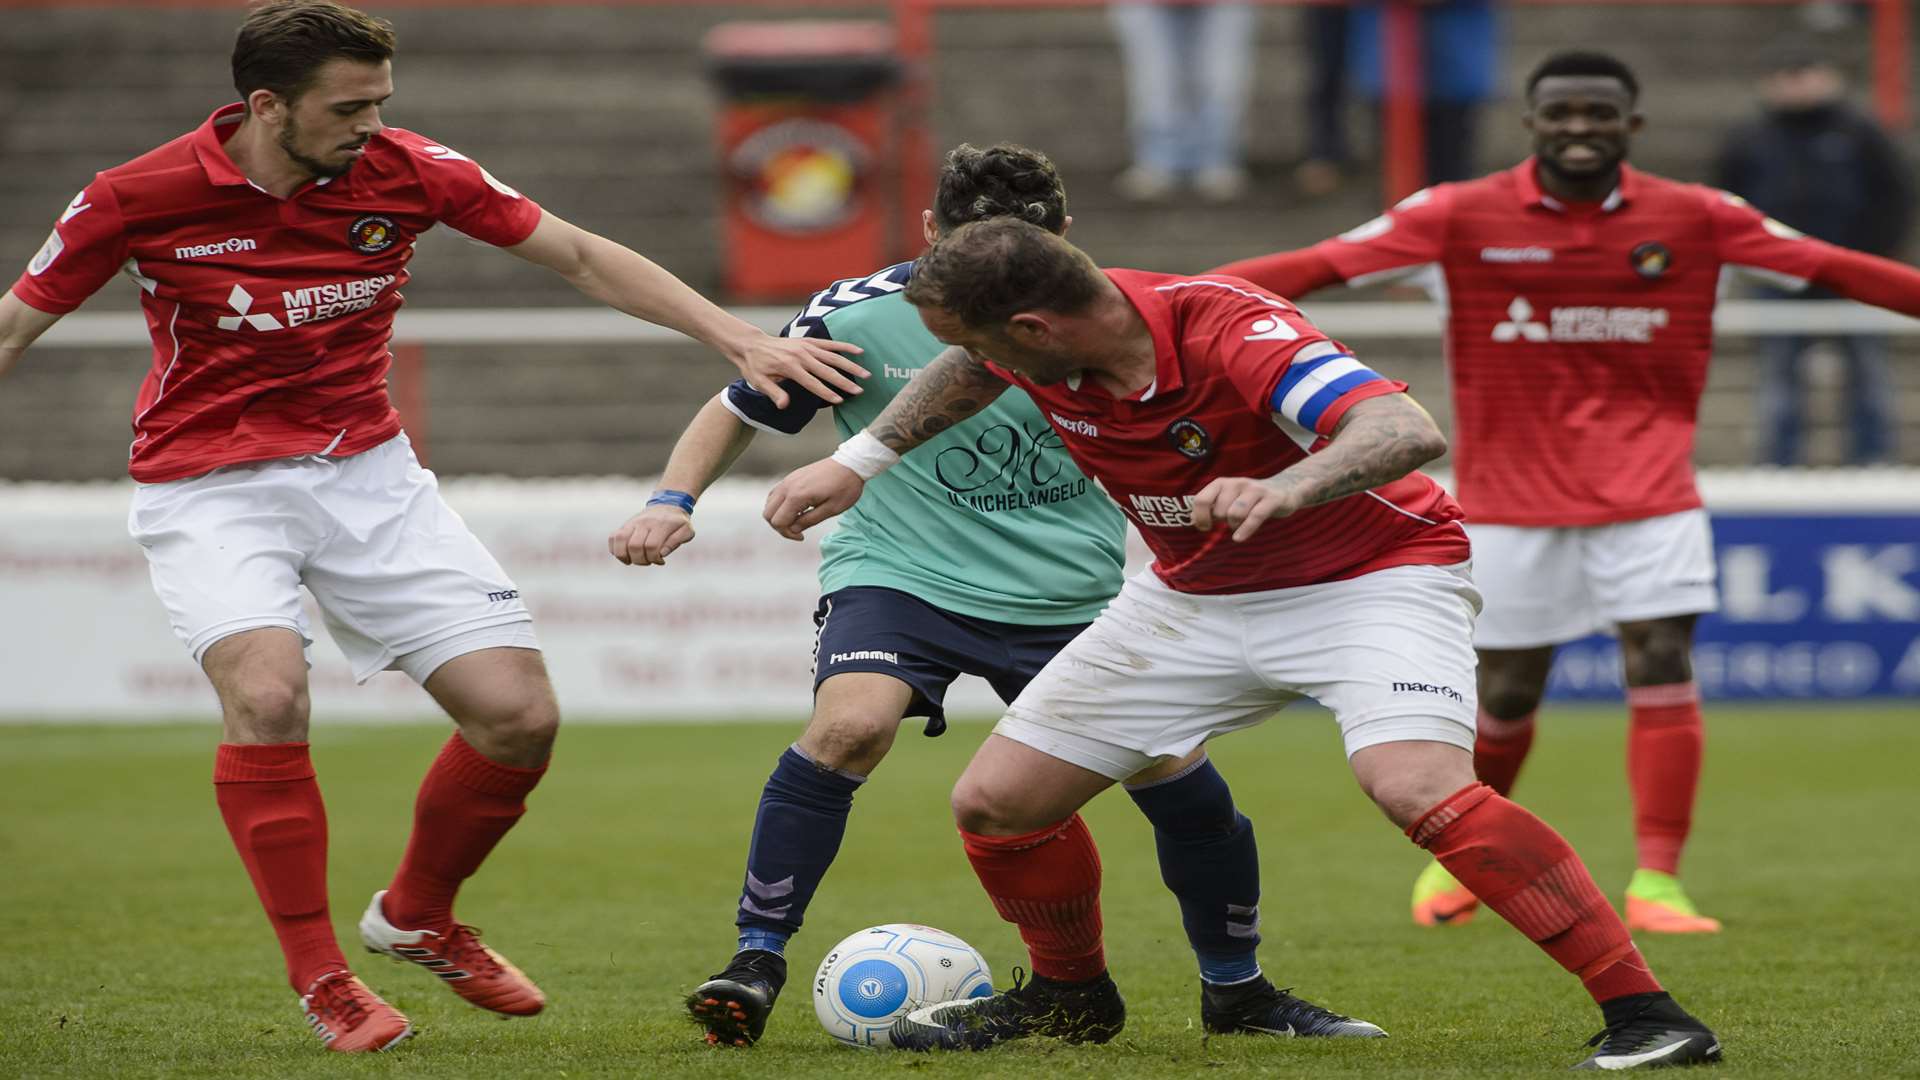 Ebbsfleet's Danny Kedwell and Jack Powell battle for possession against Weston. Picture: Andy Payton